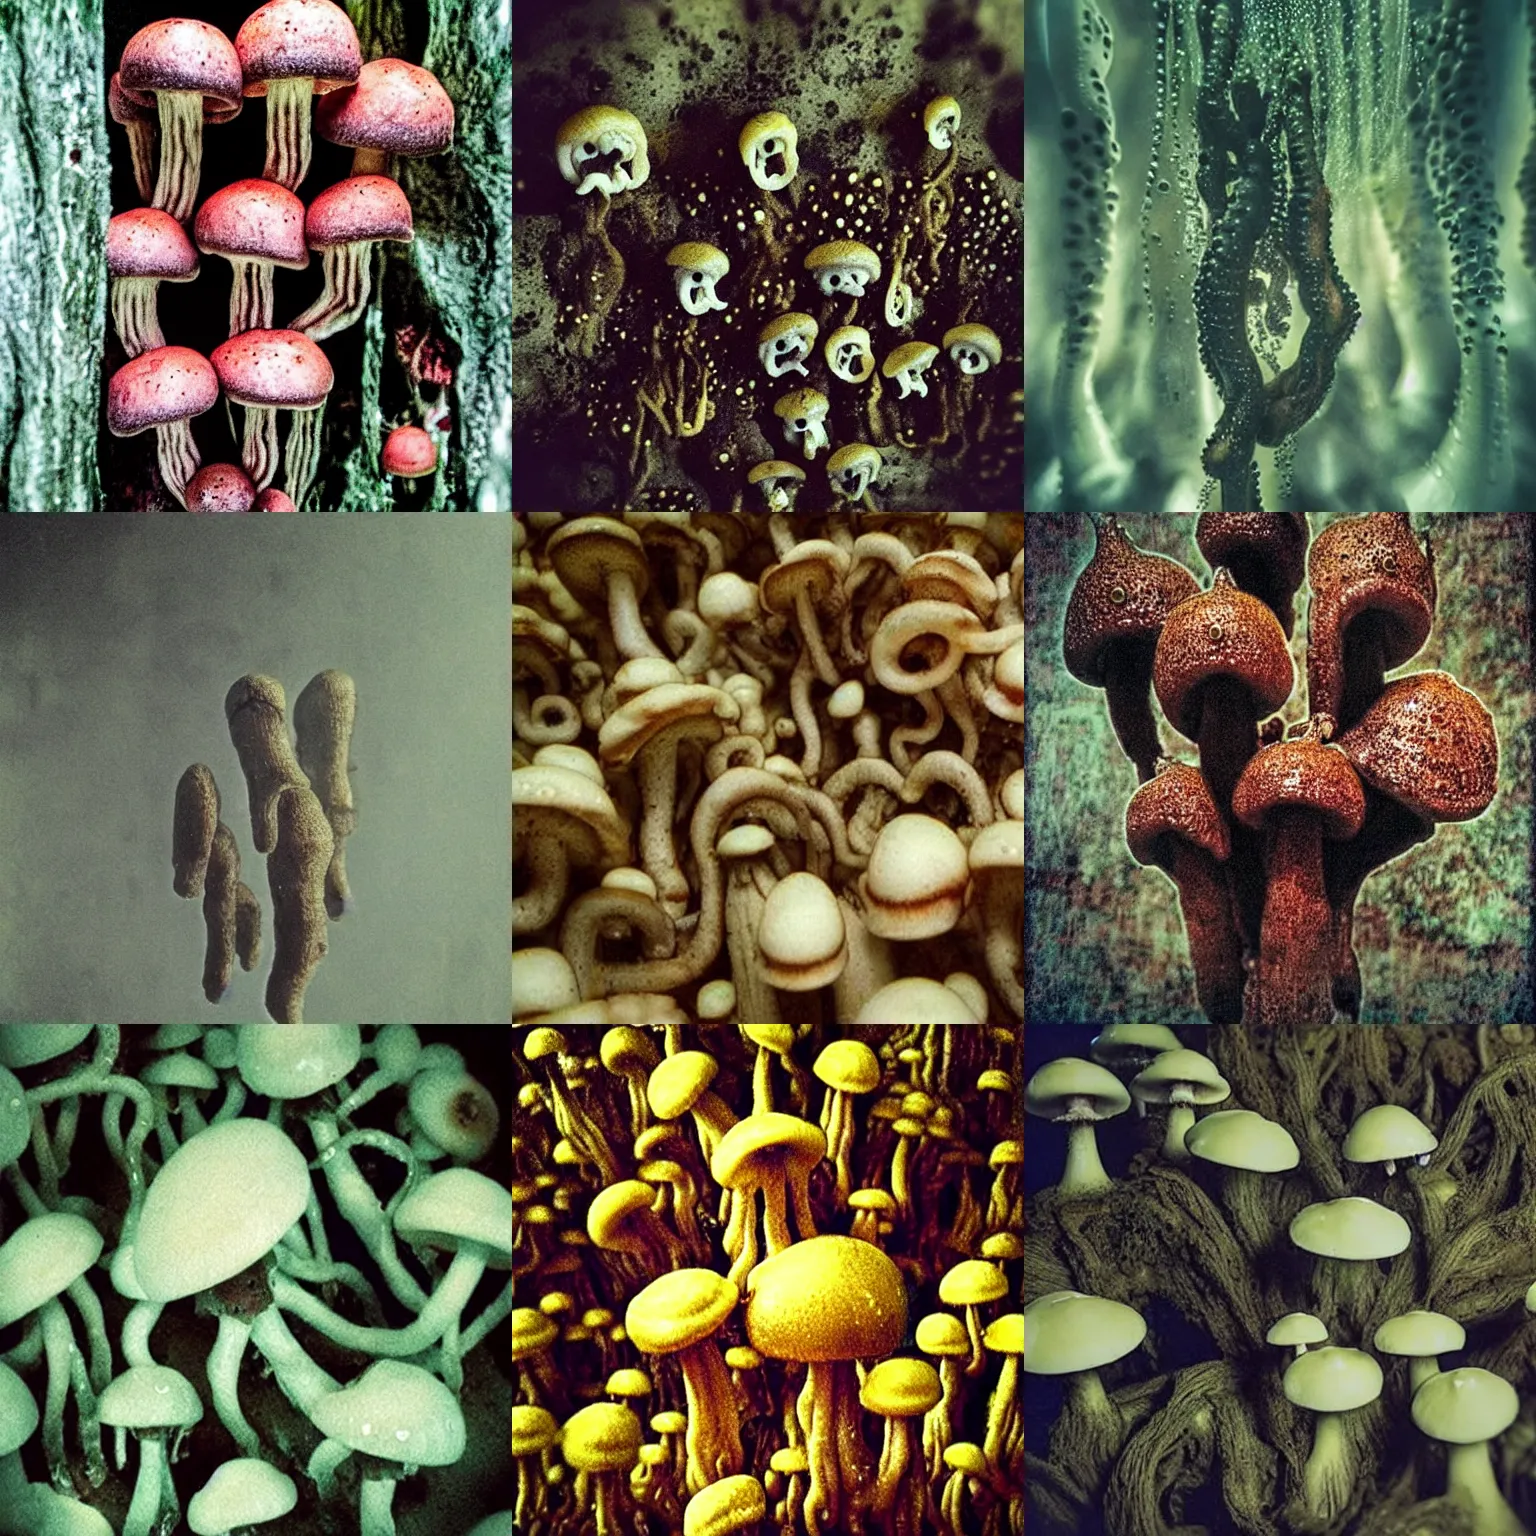 Prompt: lovecraftian mushrooms dripping poison, terrifying cursed image, unsettling creepy horror macro photo, bad quality, grainy, trypophobia